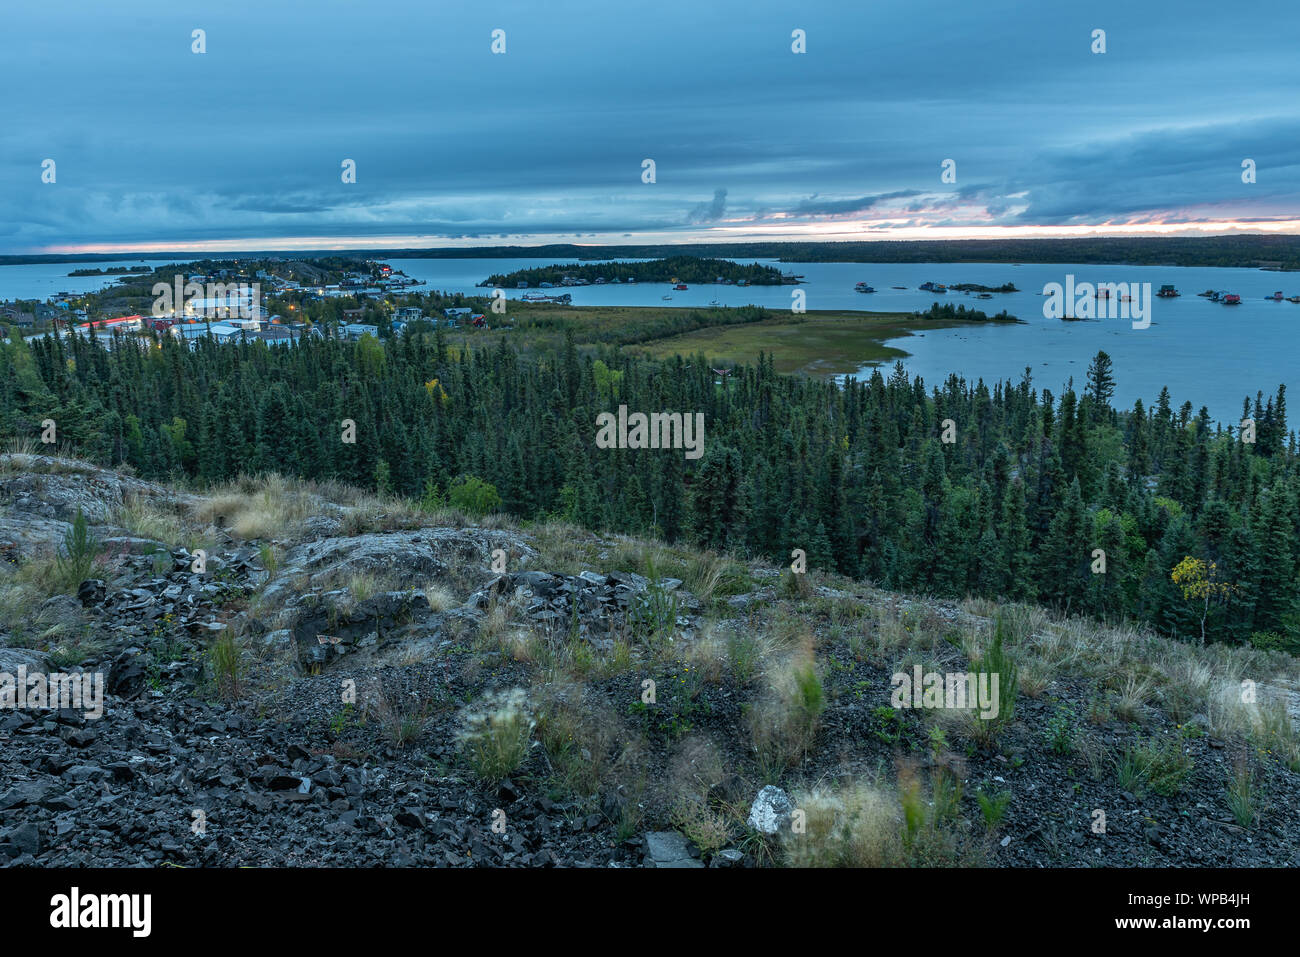 Evening at Yellowknife, Northwest Territories, Canad Stock Photo